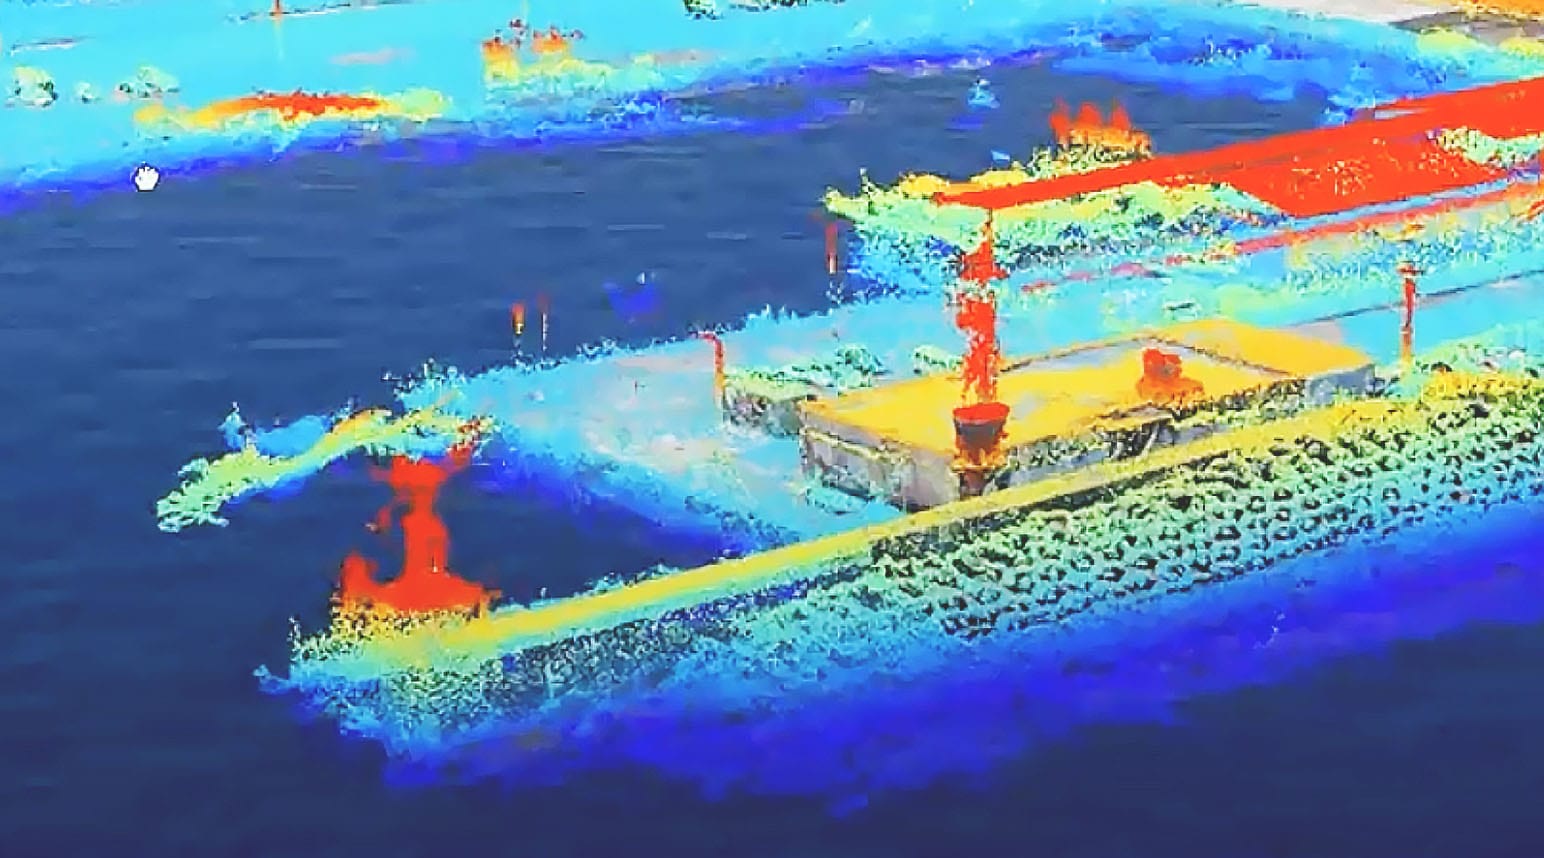 A drone image shows remote sensing data in a dark blue, light blue, yellow, and red gradient